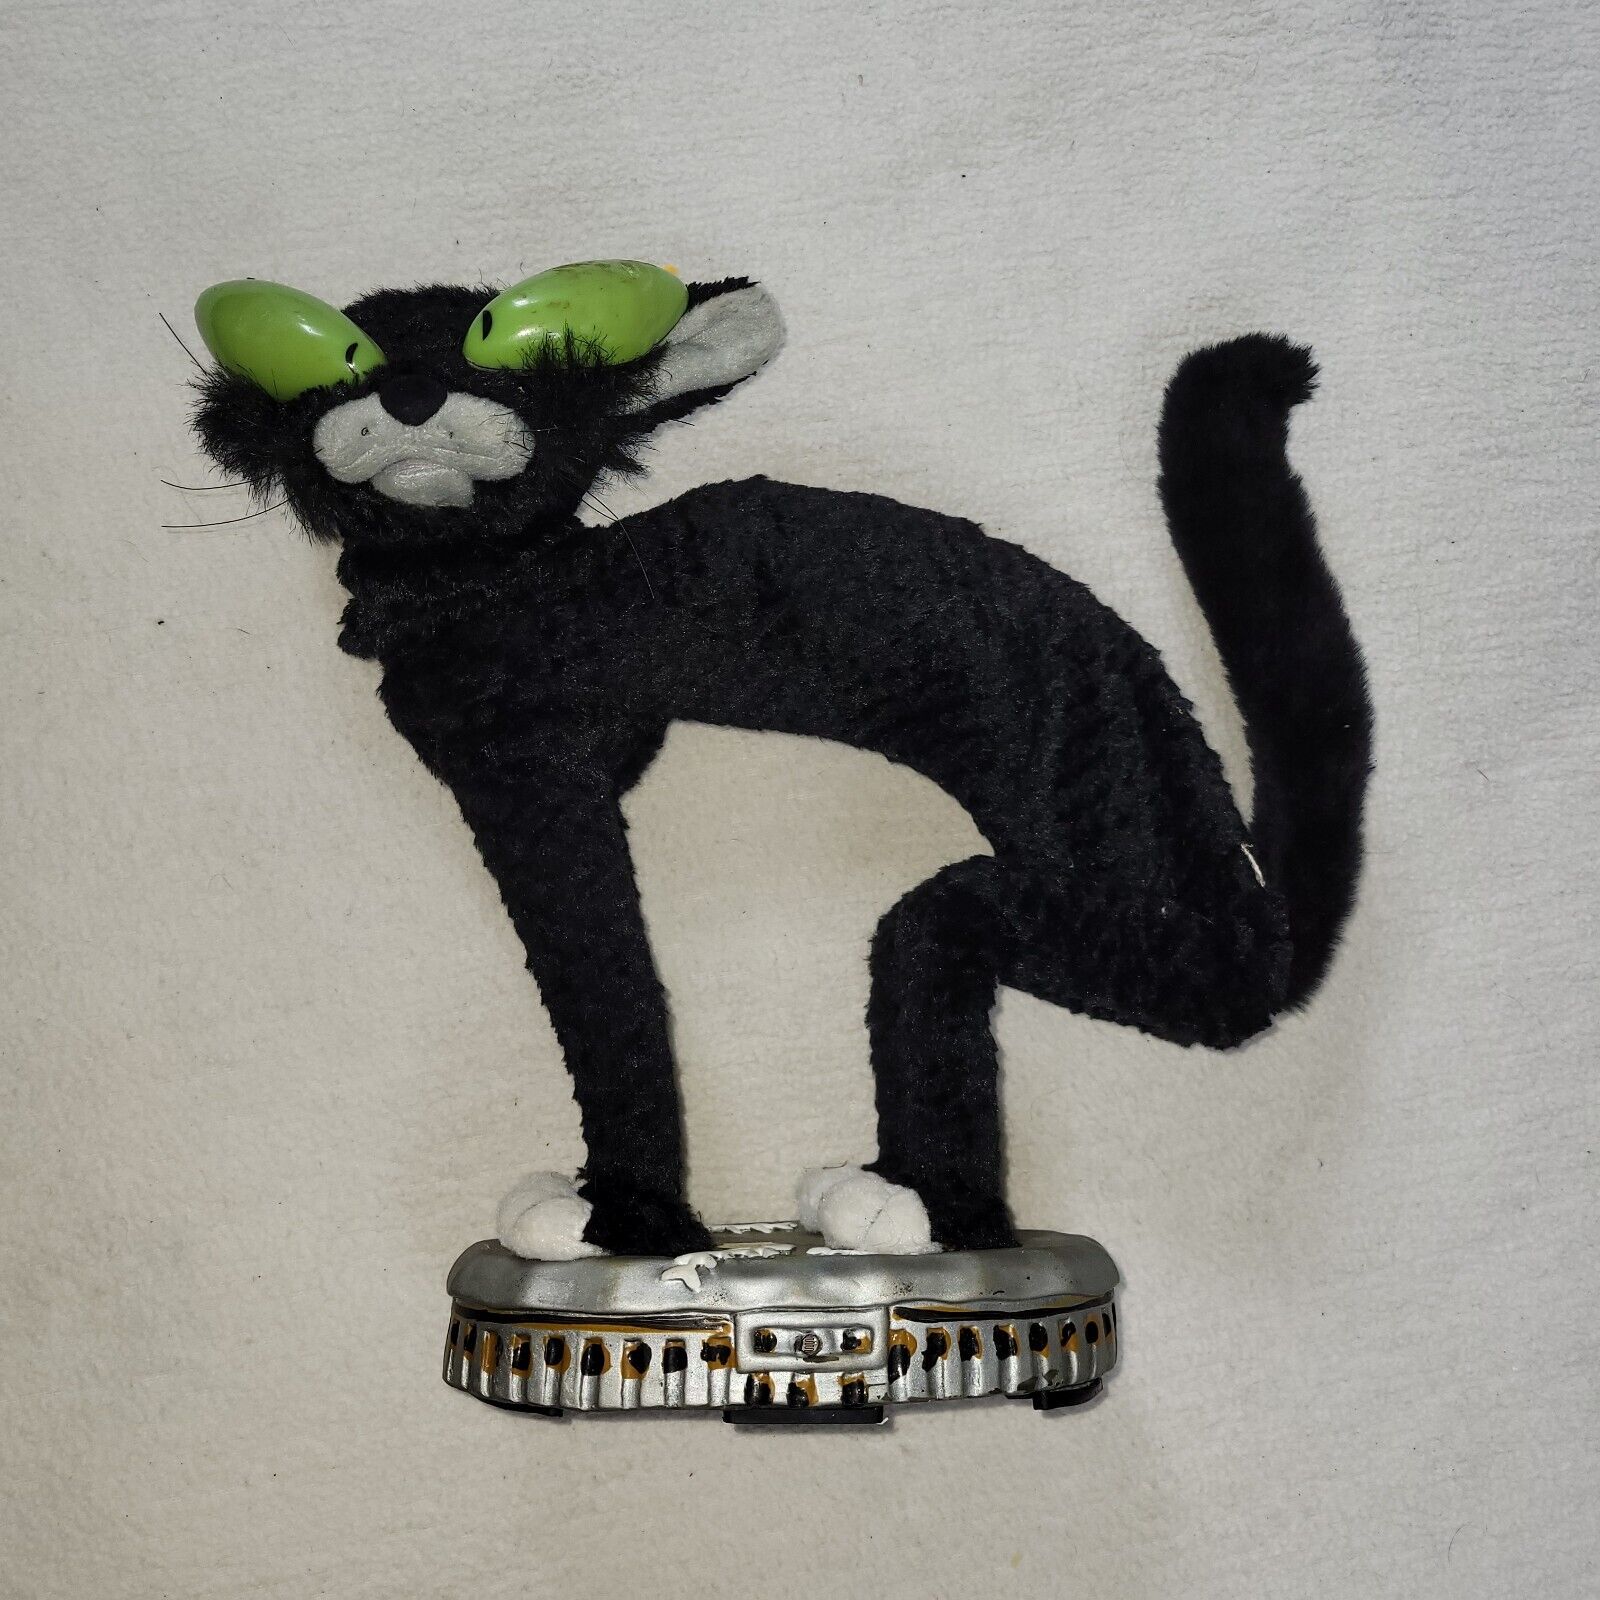 Vintage Gemmy Animated Fraidy Cat Halloween Black Alley Cat Sings Light-Up Moves